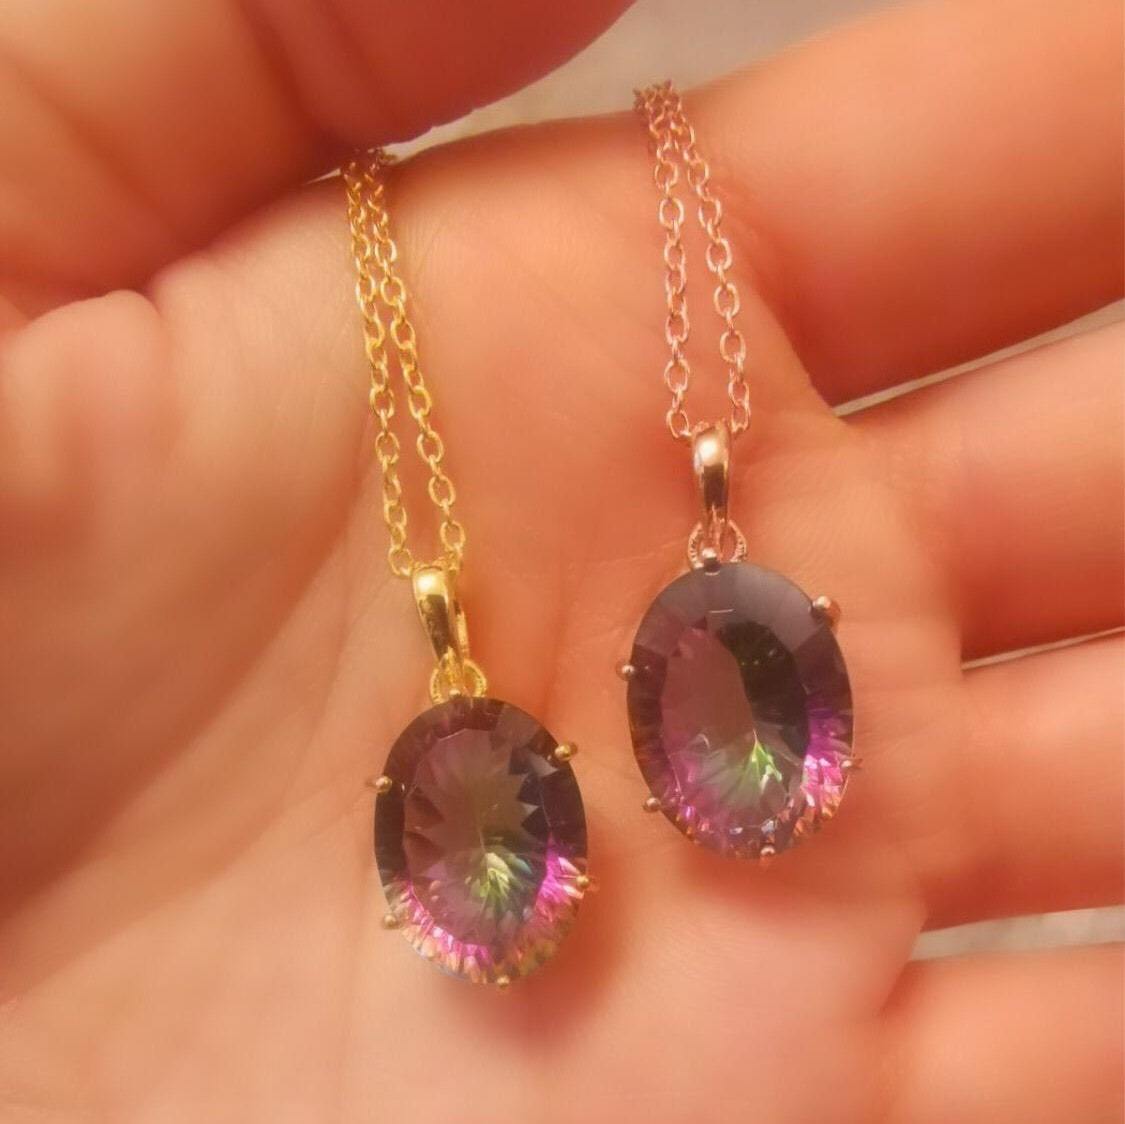 The Universe Necklace/18k Rose Gold Vermeil & Mystic Topaz - infinityXinfinity.co.uk